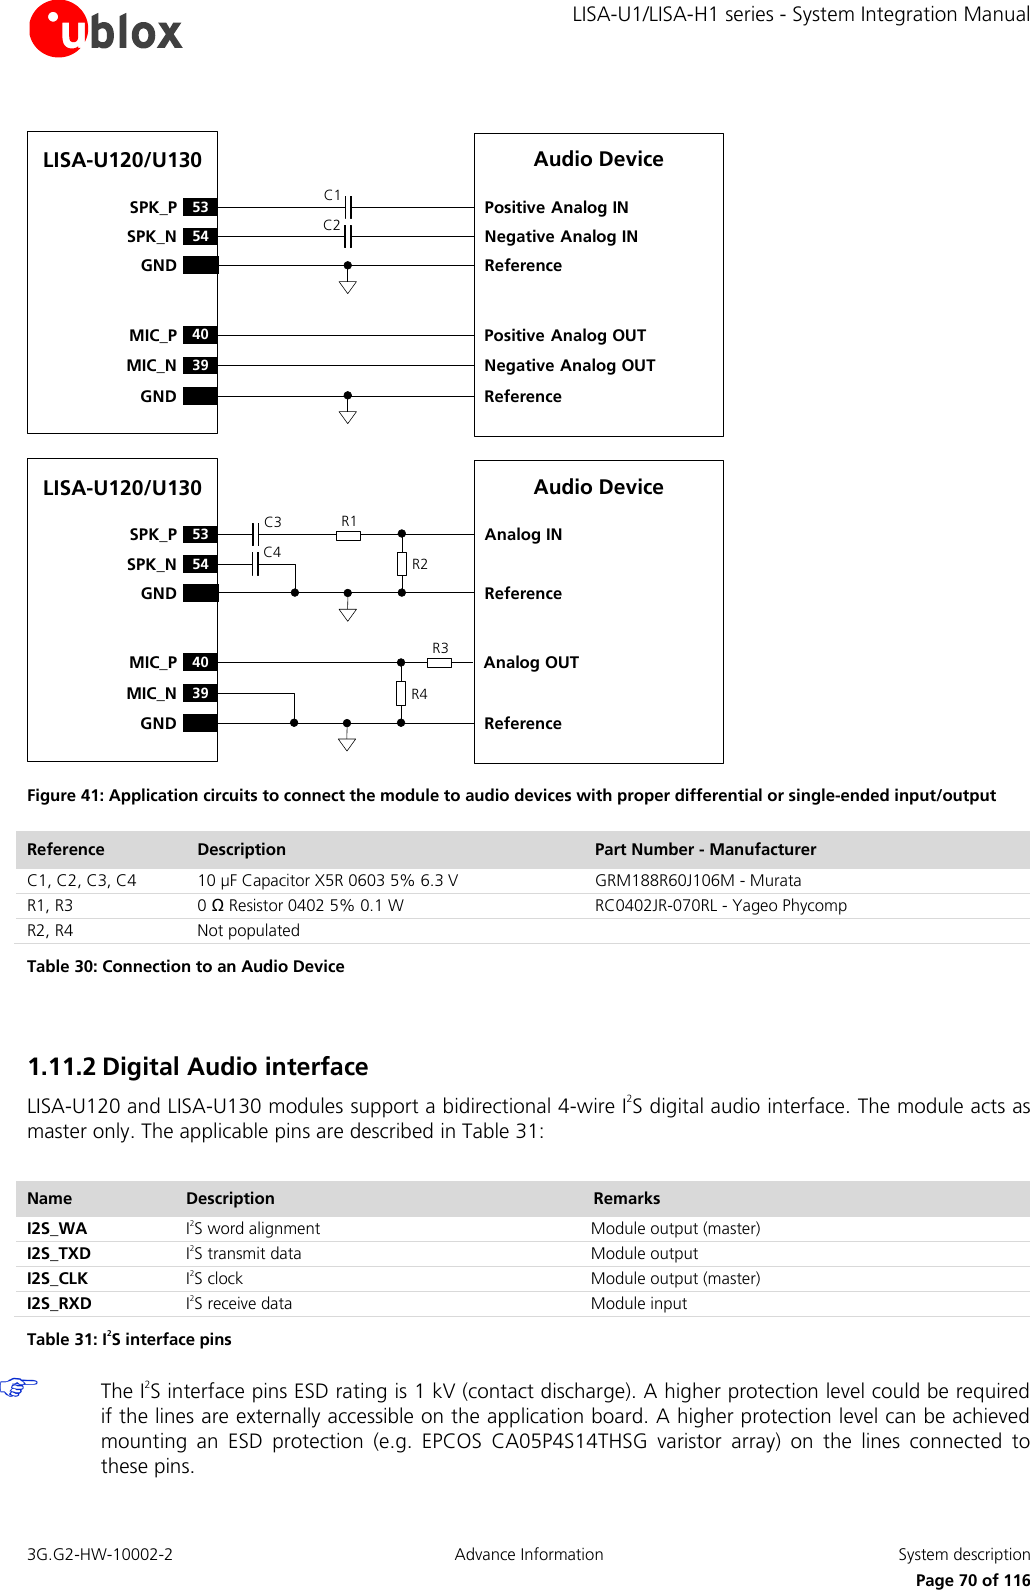     LISA-U1/LISA-H1 series - System Integration Manual 3G.G2-HW-10002-2  Advance Information  System description      Page 70 of 116 LISA-U120/U130C1C254SPK_N53SPK_PGND40MIC_PGNDNegative Analog INPositive Analog INNegative Analog OUTPositive Analog OUTAudio DeviceReferenceReference39MIC_NLISA-U120/U13054SPK_N53SPK_PGND40MIC_PGNDAnalog INAudio DeviceReferenceReference39MIC_NAnalog OUTC3C4 R2R1R4R3 Figure 41: Application circuits to connect the module to audio devices with proper differential or single-ended input/output Reference Description Part Number - Manufacturer C1, C2, C3, C4 10 µF Capacitor X5R 0603 5% 6.3 V  GRM188R60J106M - Murata R1, R3 0 Ω Resistor 0402 5% 0.1 W  RC0402JR-070RL - Yageo Phycomp R2, R4 Not populated  Table 30: Connection to an Audio Device  1.11.2 Digital Audio interface  LISA-U120 and LISA-U130 modules support a bidirectional 4-wire I2S digital audio interface. The module acts as master only. The applicable pins are described in Table 31:  Name Description Remarks I2S_WA I2S word alignment Module output (master) I2S_TXD I2S transmit data Module output  I2S_CLK I2S clock Module output (master) I2S_RXD I2S receive data Module input  Table 31: I2S interface pins  The I2S interface pins ESD rating is 1 kV (contact discharge). A higher protection level could be required if the lines are externally accessible on the application board. A higher protection level can be achieved mounting  an  ESD  protection  (e.g.  EPCOS  CA05P4S14THSG  varistor  array)  on  the  lines  connected  to these pins. 